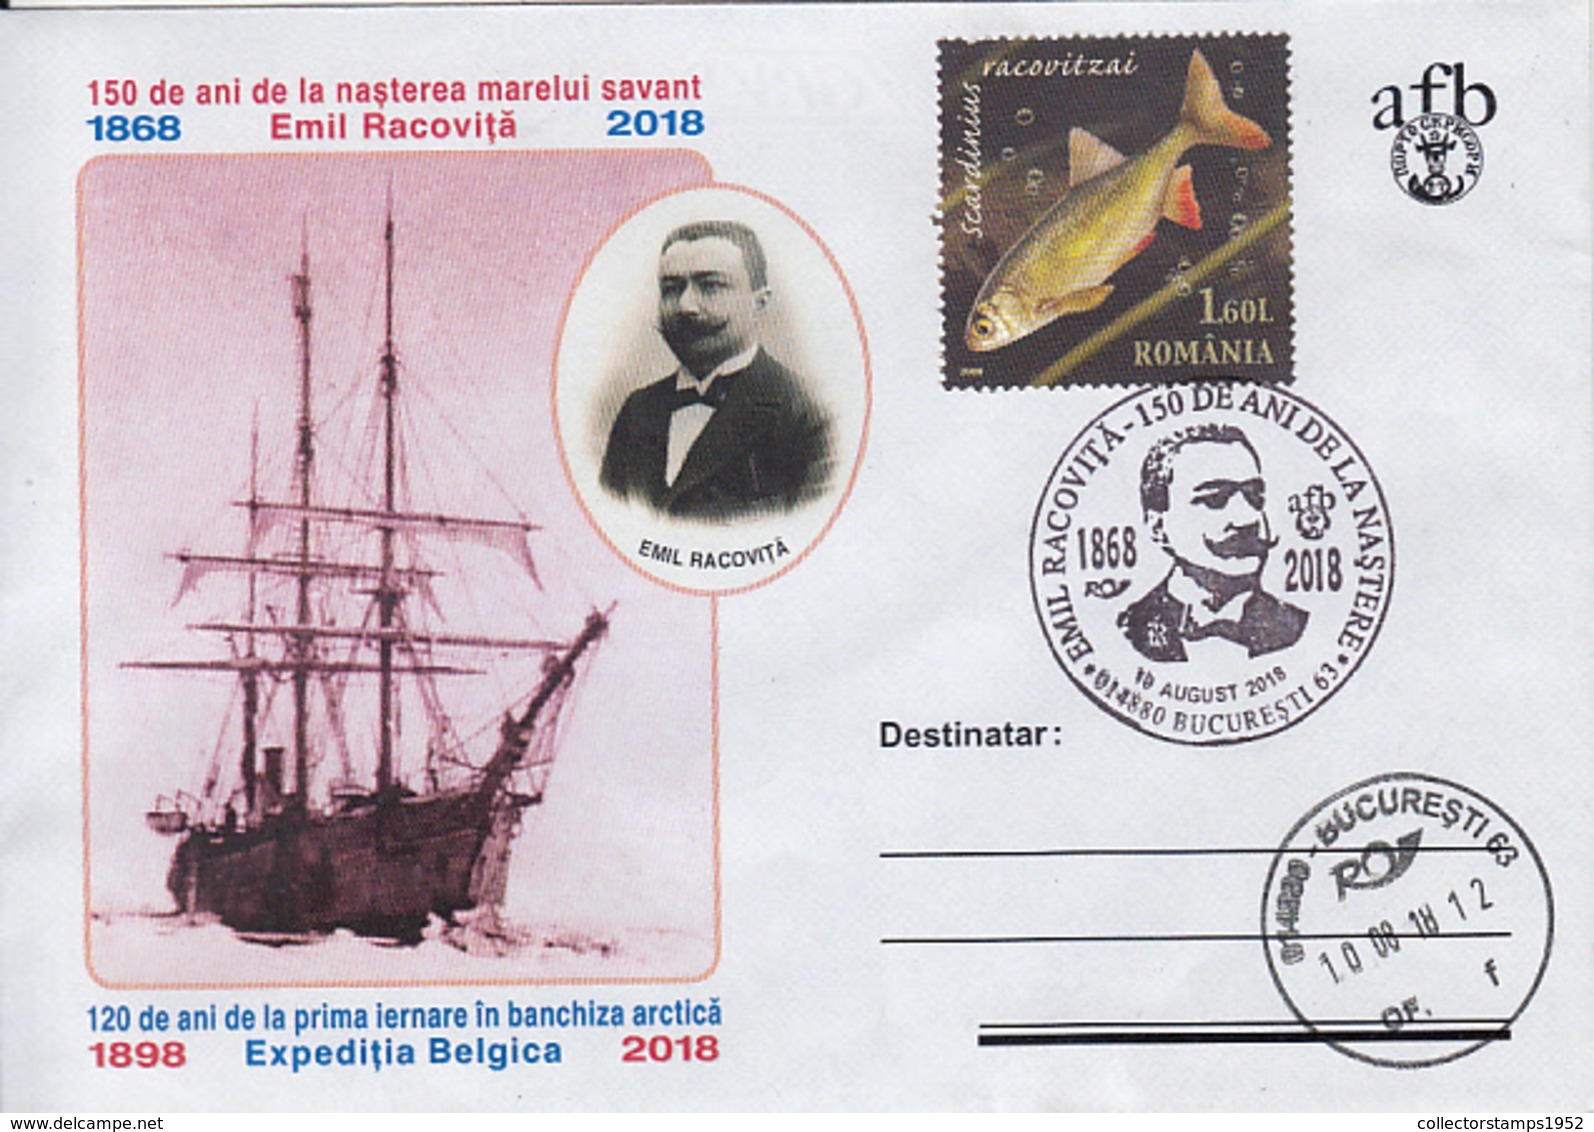 78227- EMIL RACOVITA, BELGICA ARCTIC EXPEDITION, SHIP, NORTH POLE, SPECIAL COVER, 2018, ROMANIA - Arctic Expeditions